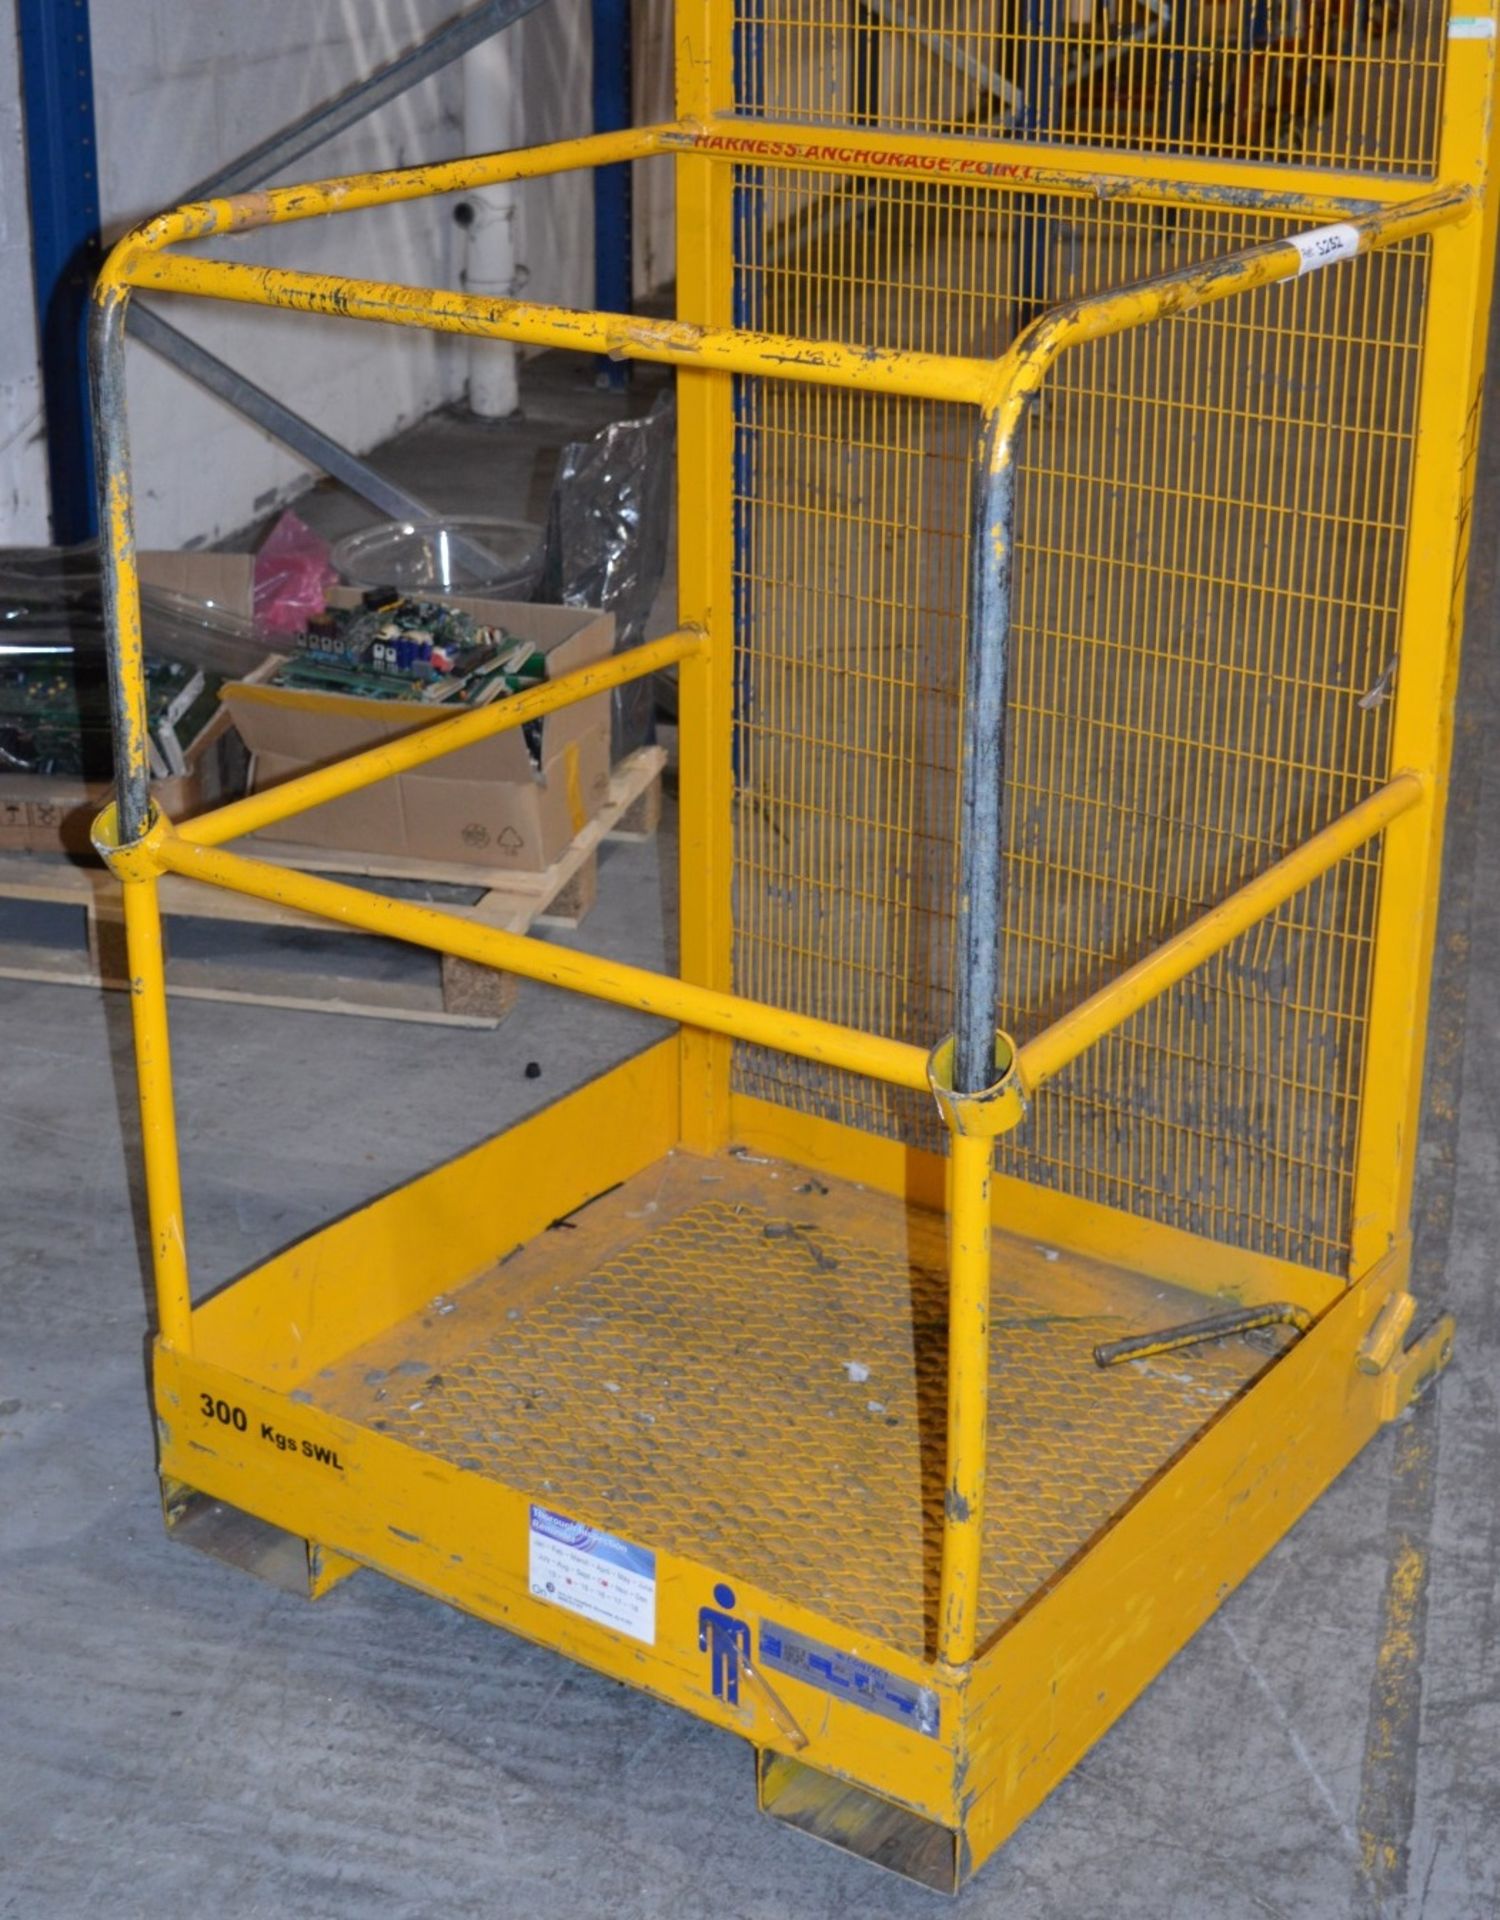 1 x One Man Access Platform Forklift Truck Cage - Type WP SP MK1 - Features Climb Through Bars Rigid